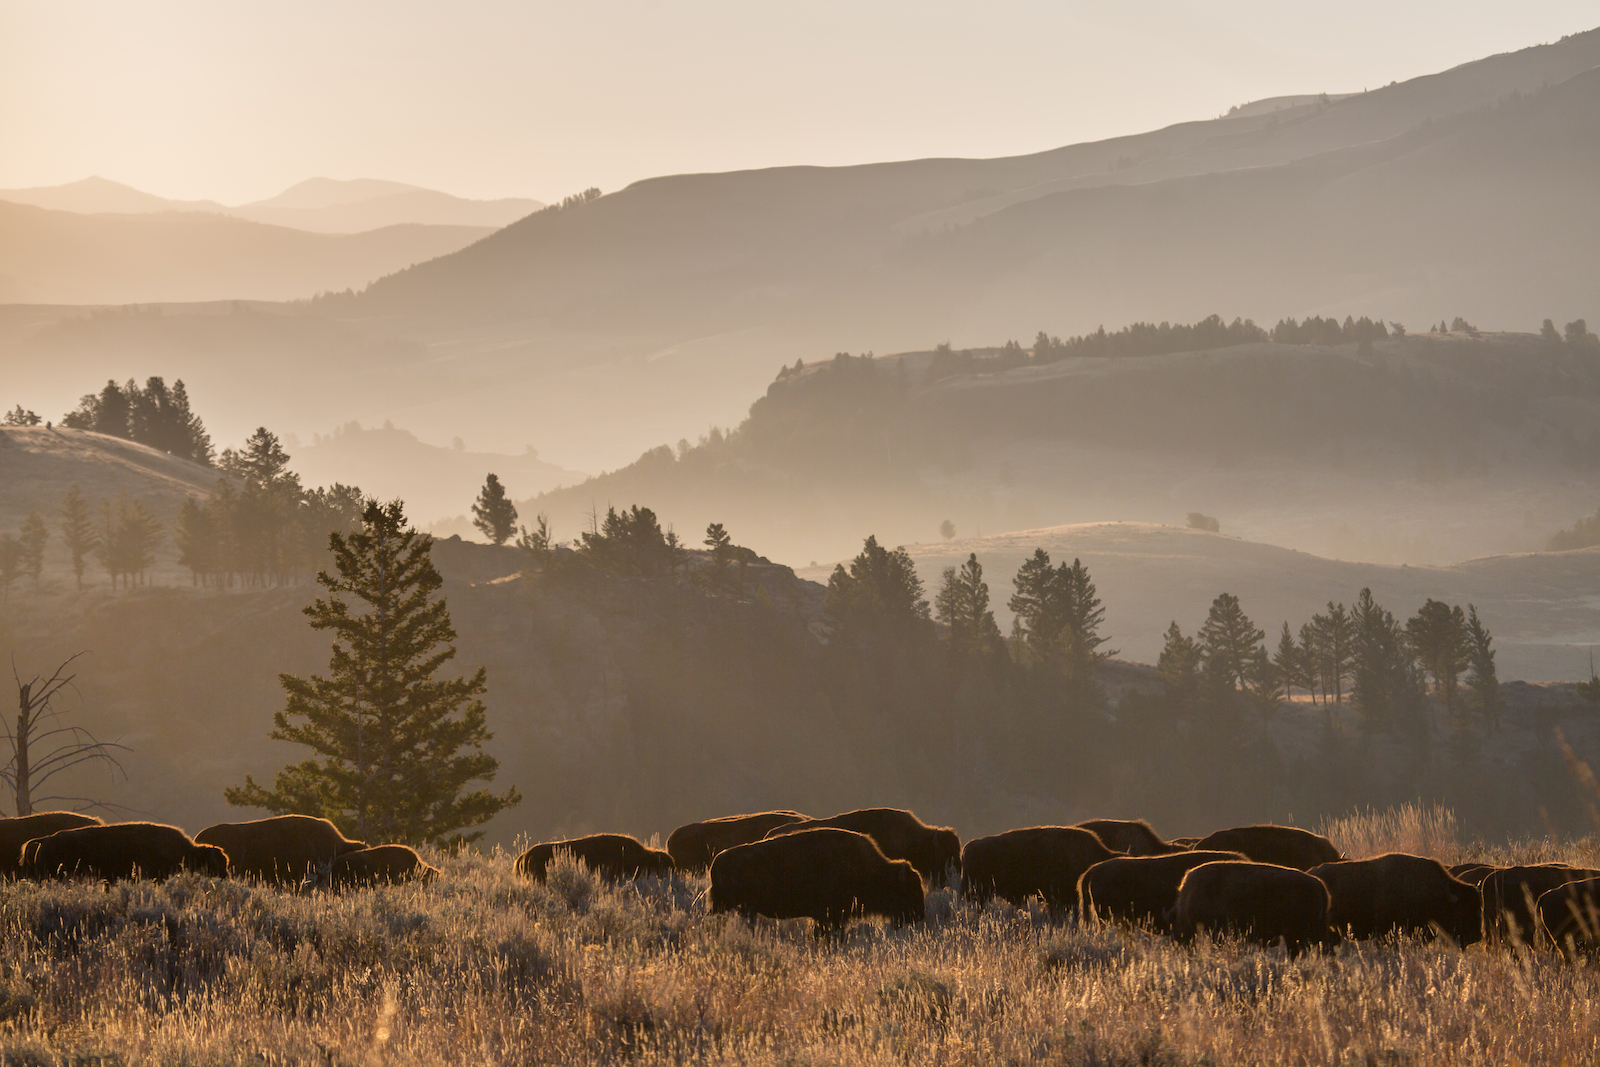 Bison grazing in Lamar Valley, Yellowstone National Park, Wyoming | Photo Credit: NPS